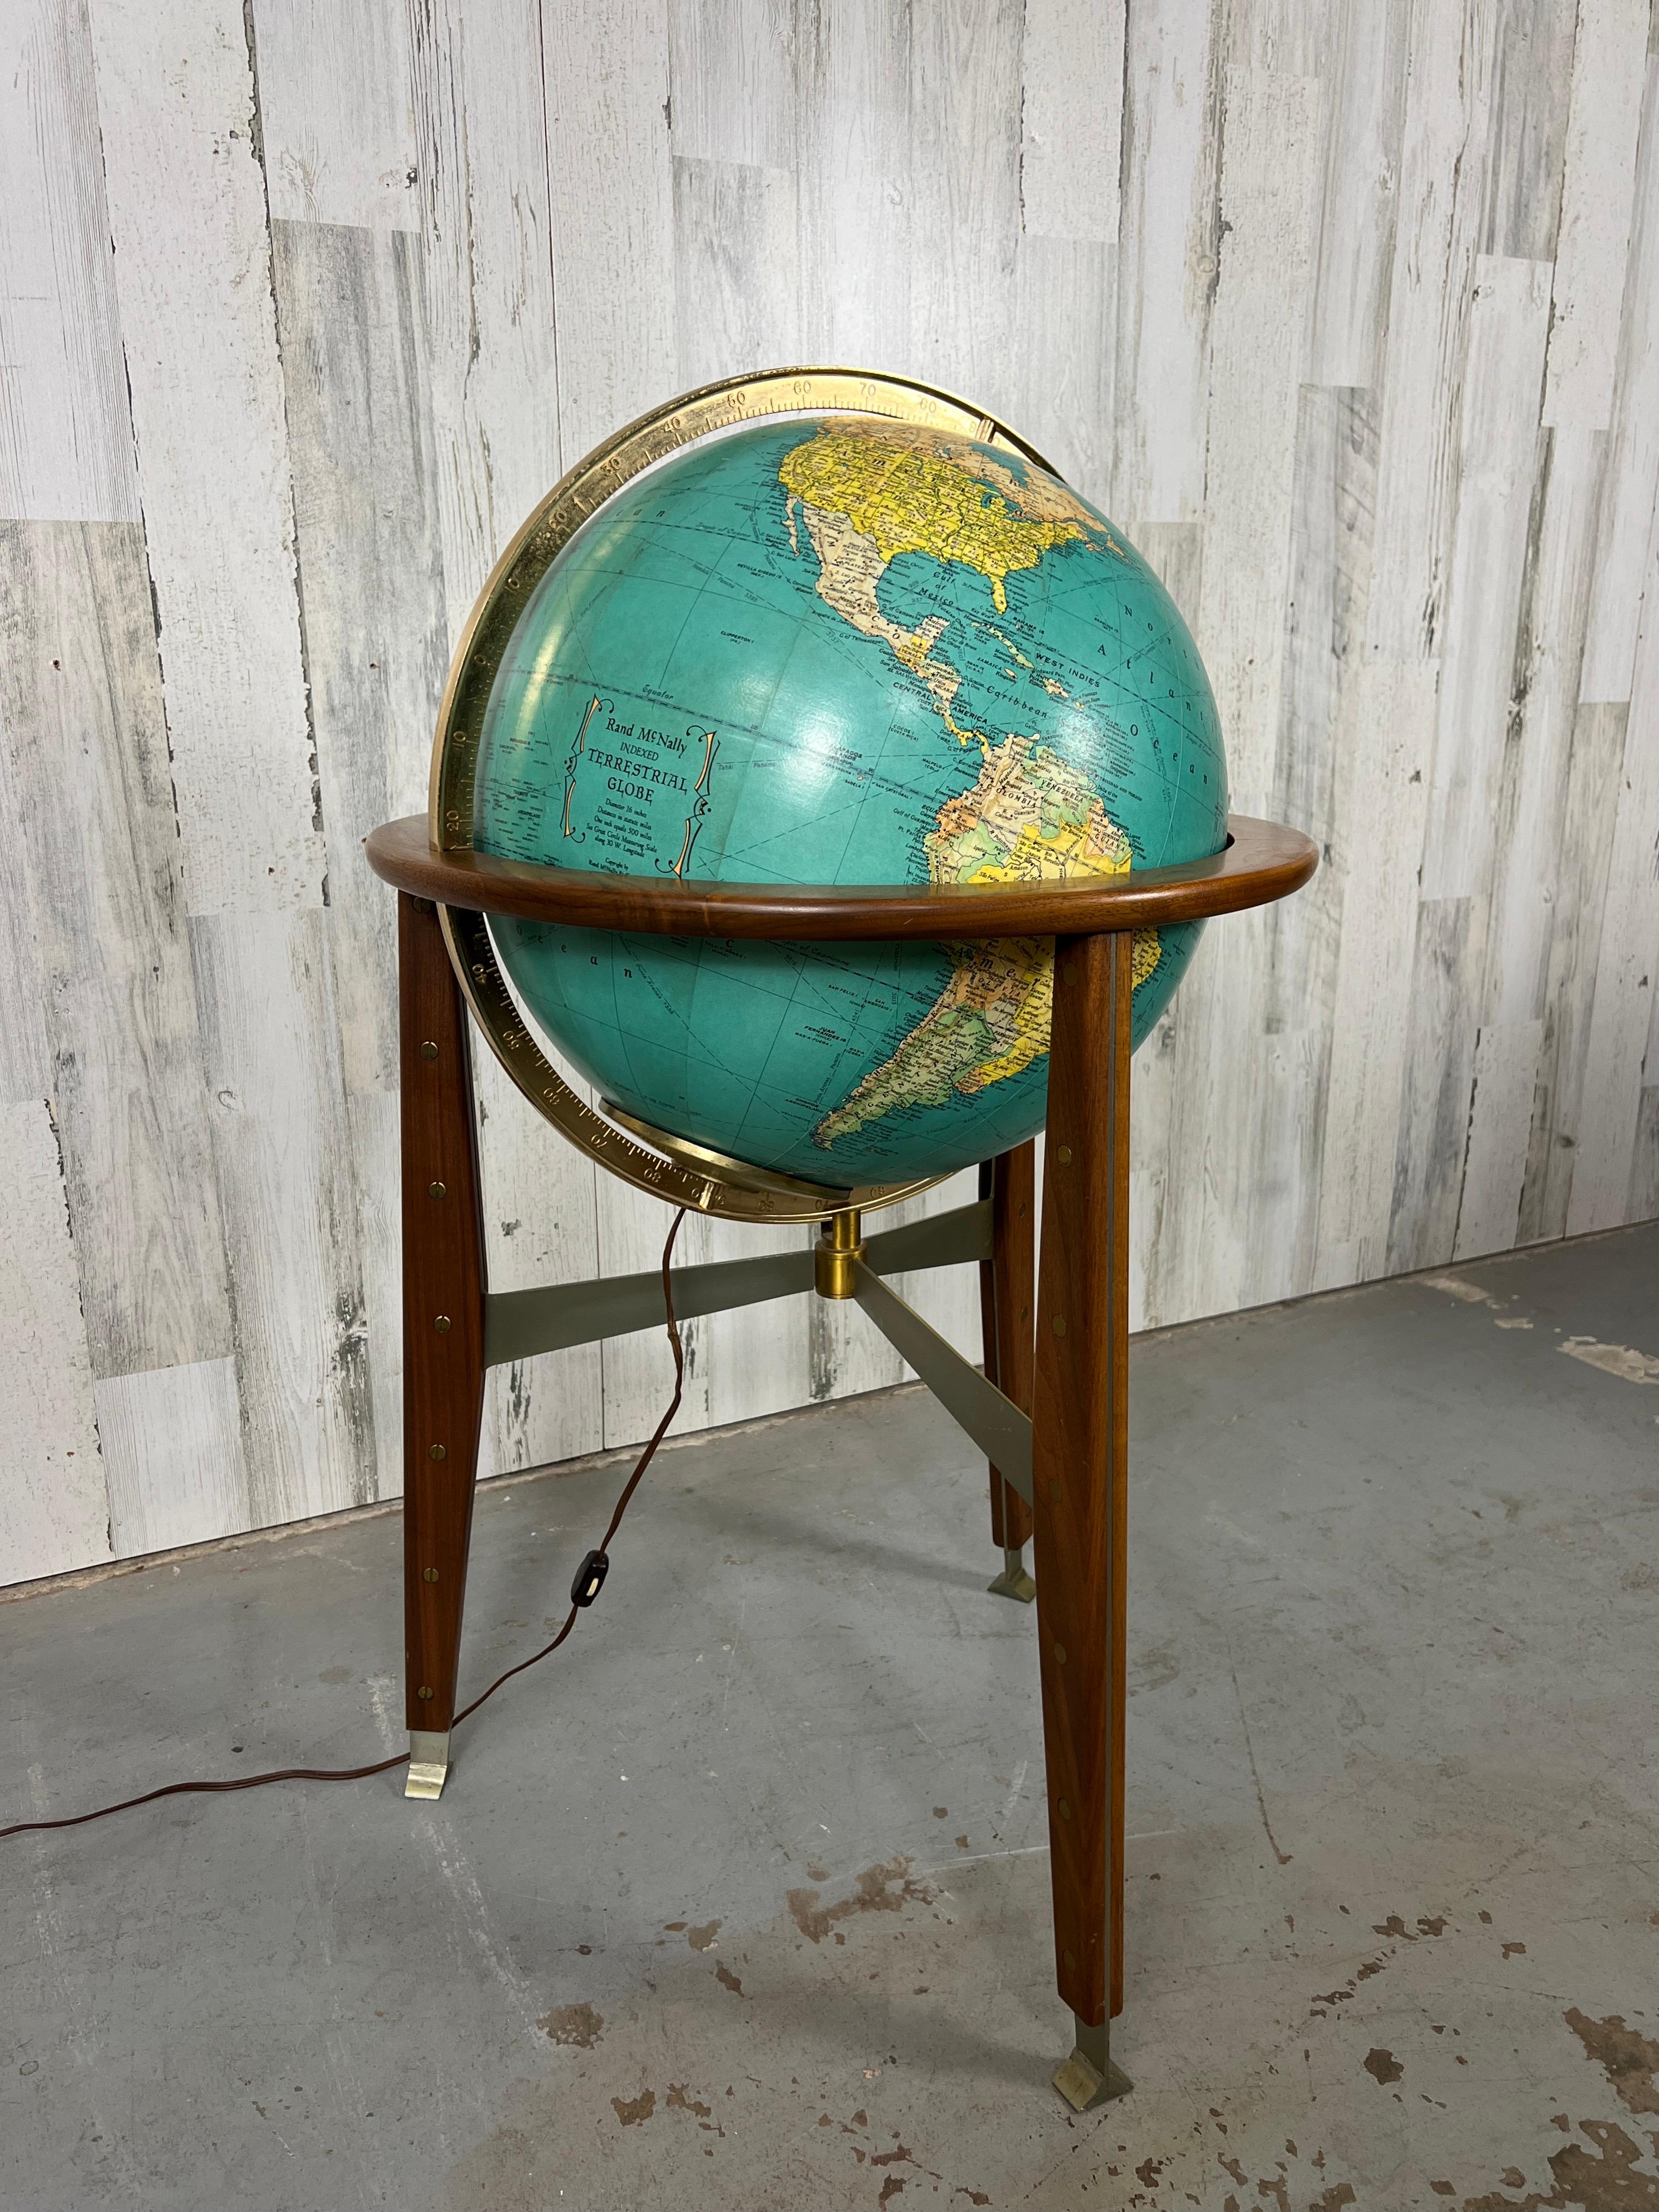 Stainless steel sandwiched by solid walnut saber legs, fastened with stud and screws make this globe base equally stunning as the globe it self. The illuminated glass globe is covered with a Rand McNally terrestrial map.